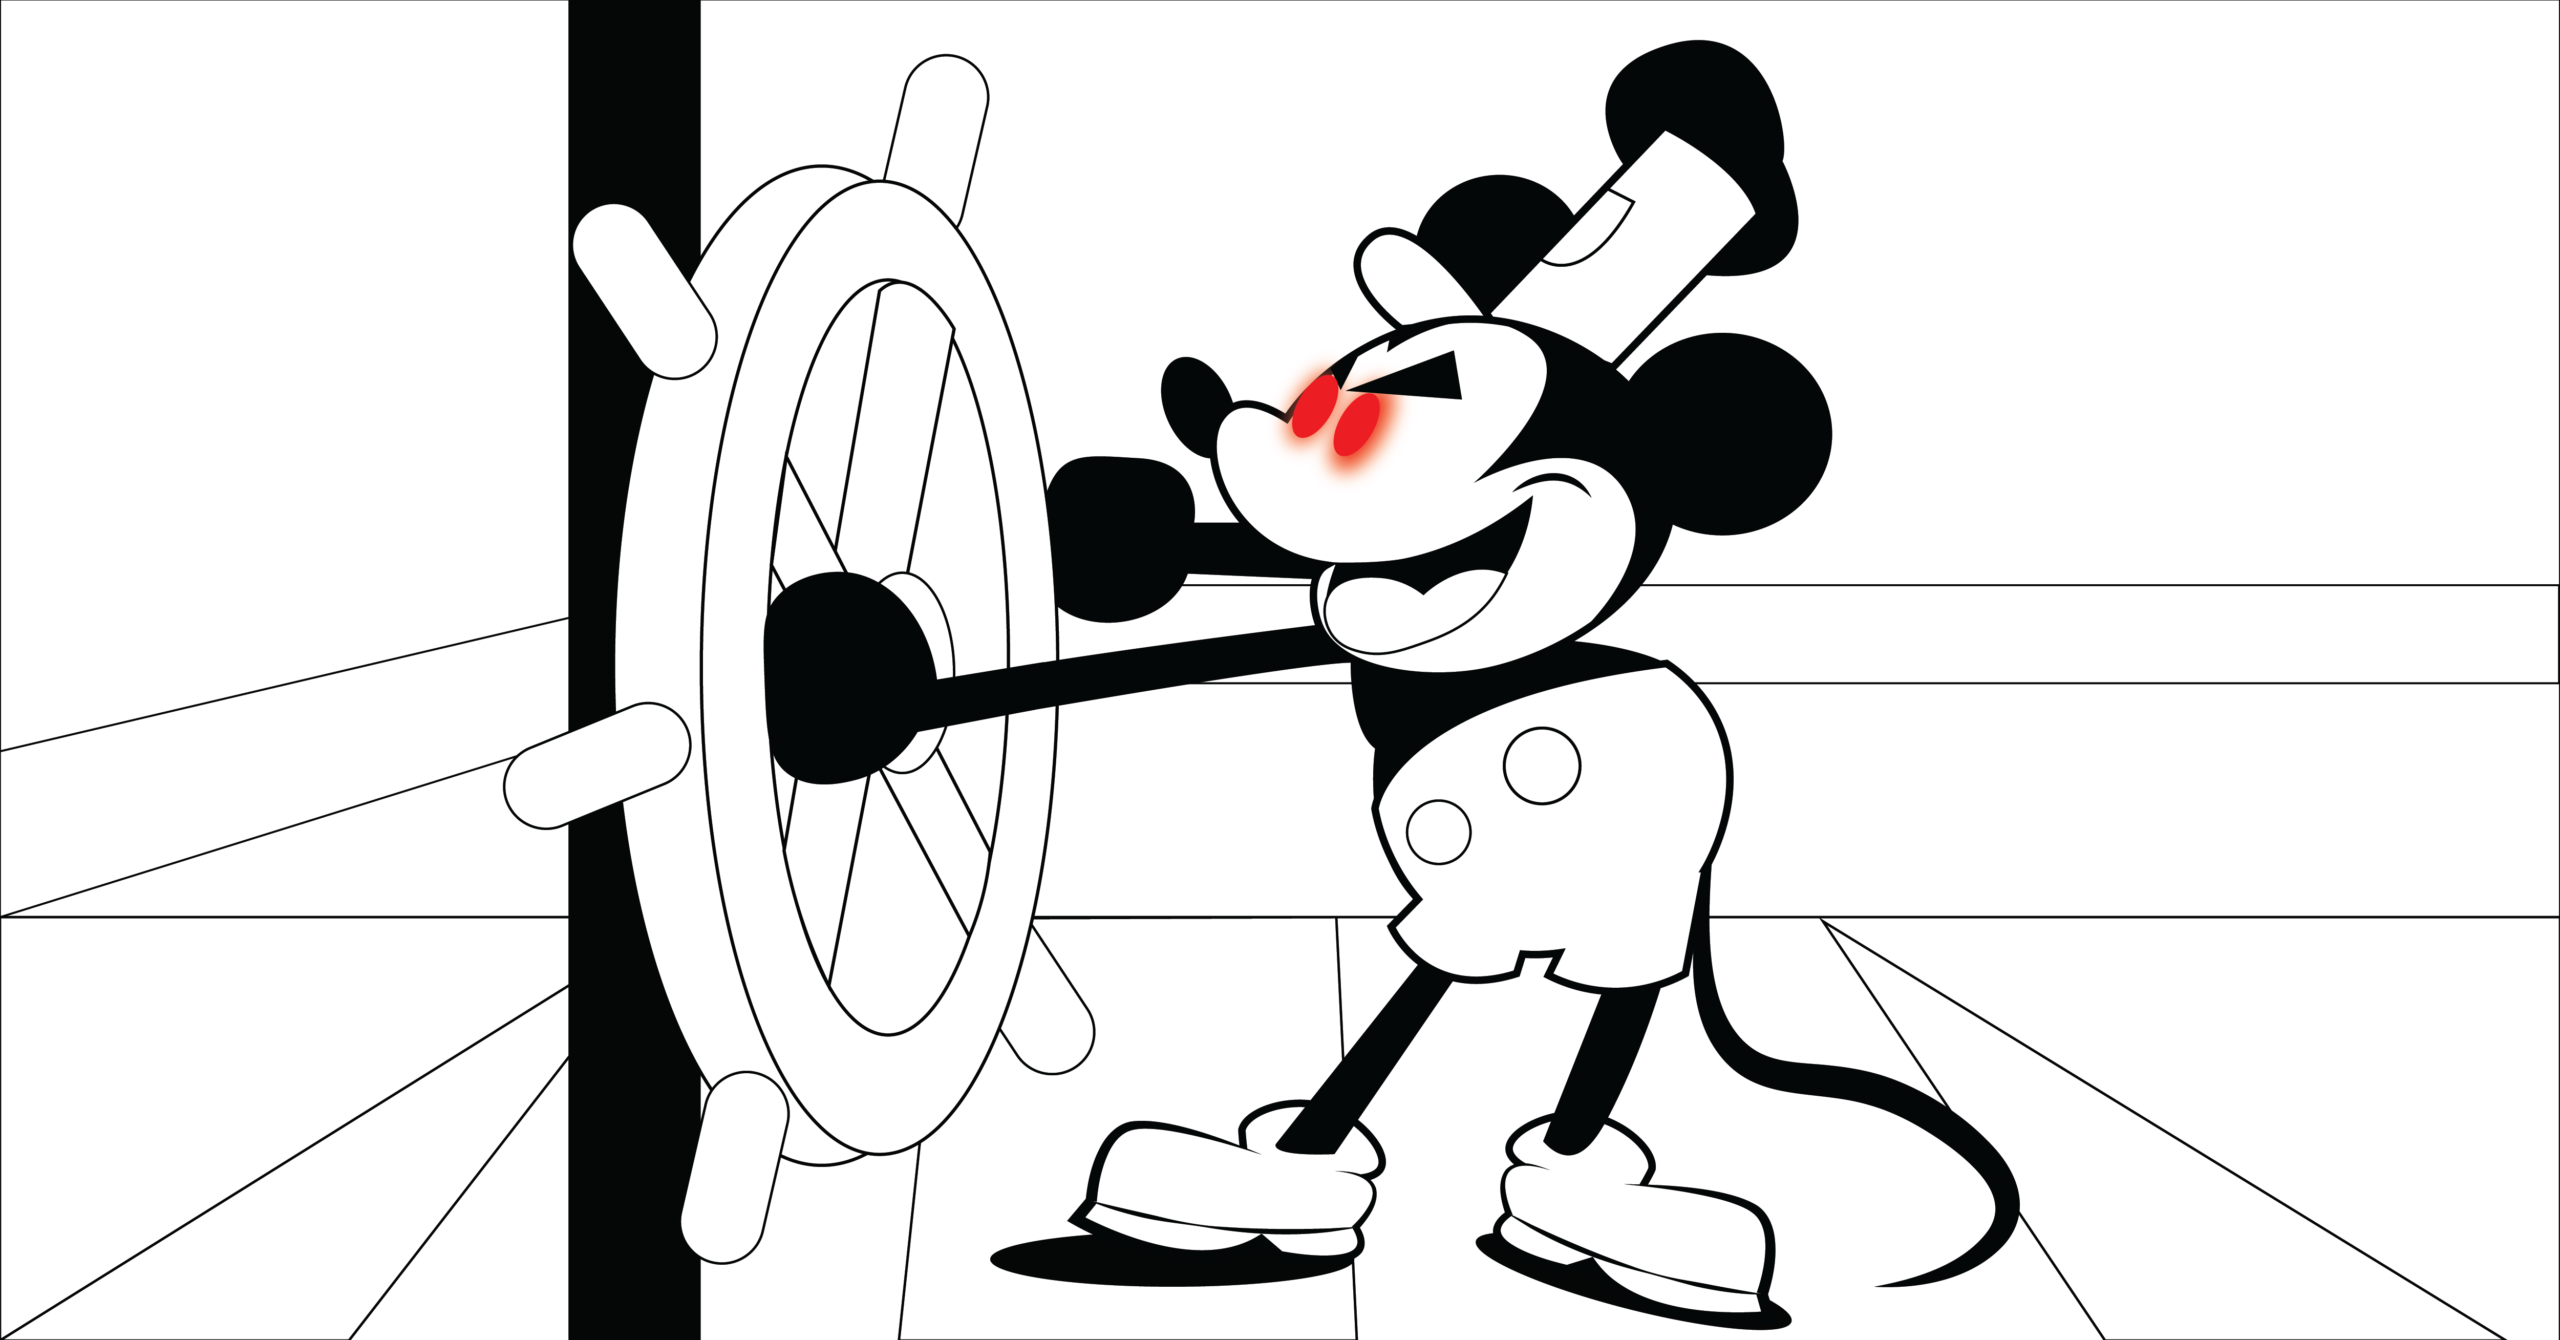 Disney's Mickey Mouse enters public domain as 95-year-old copyright expires